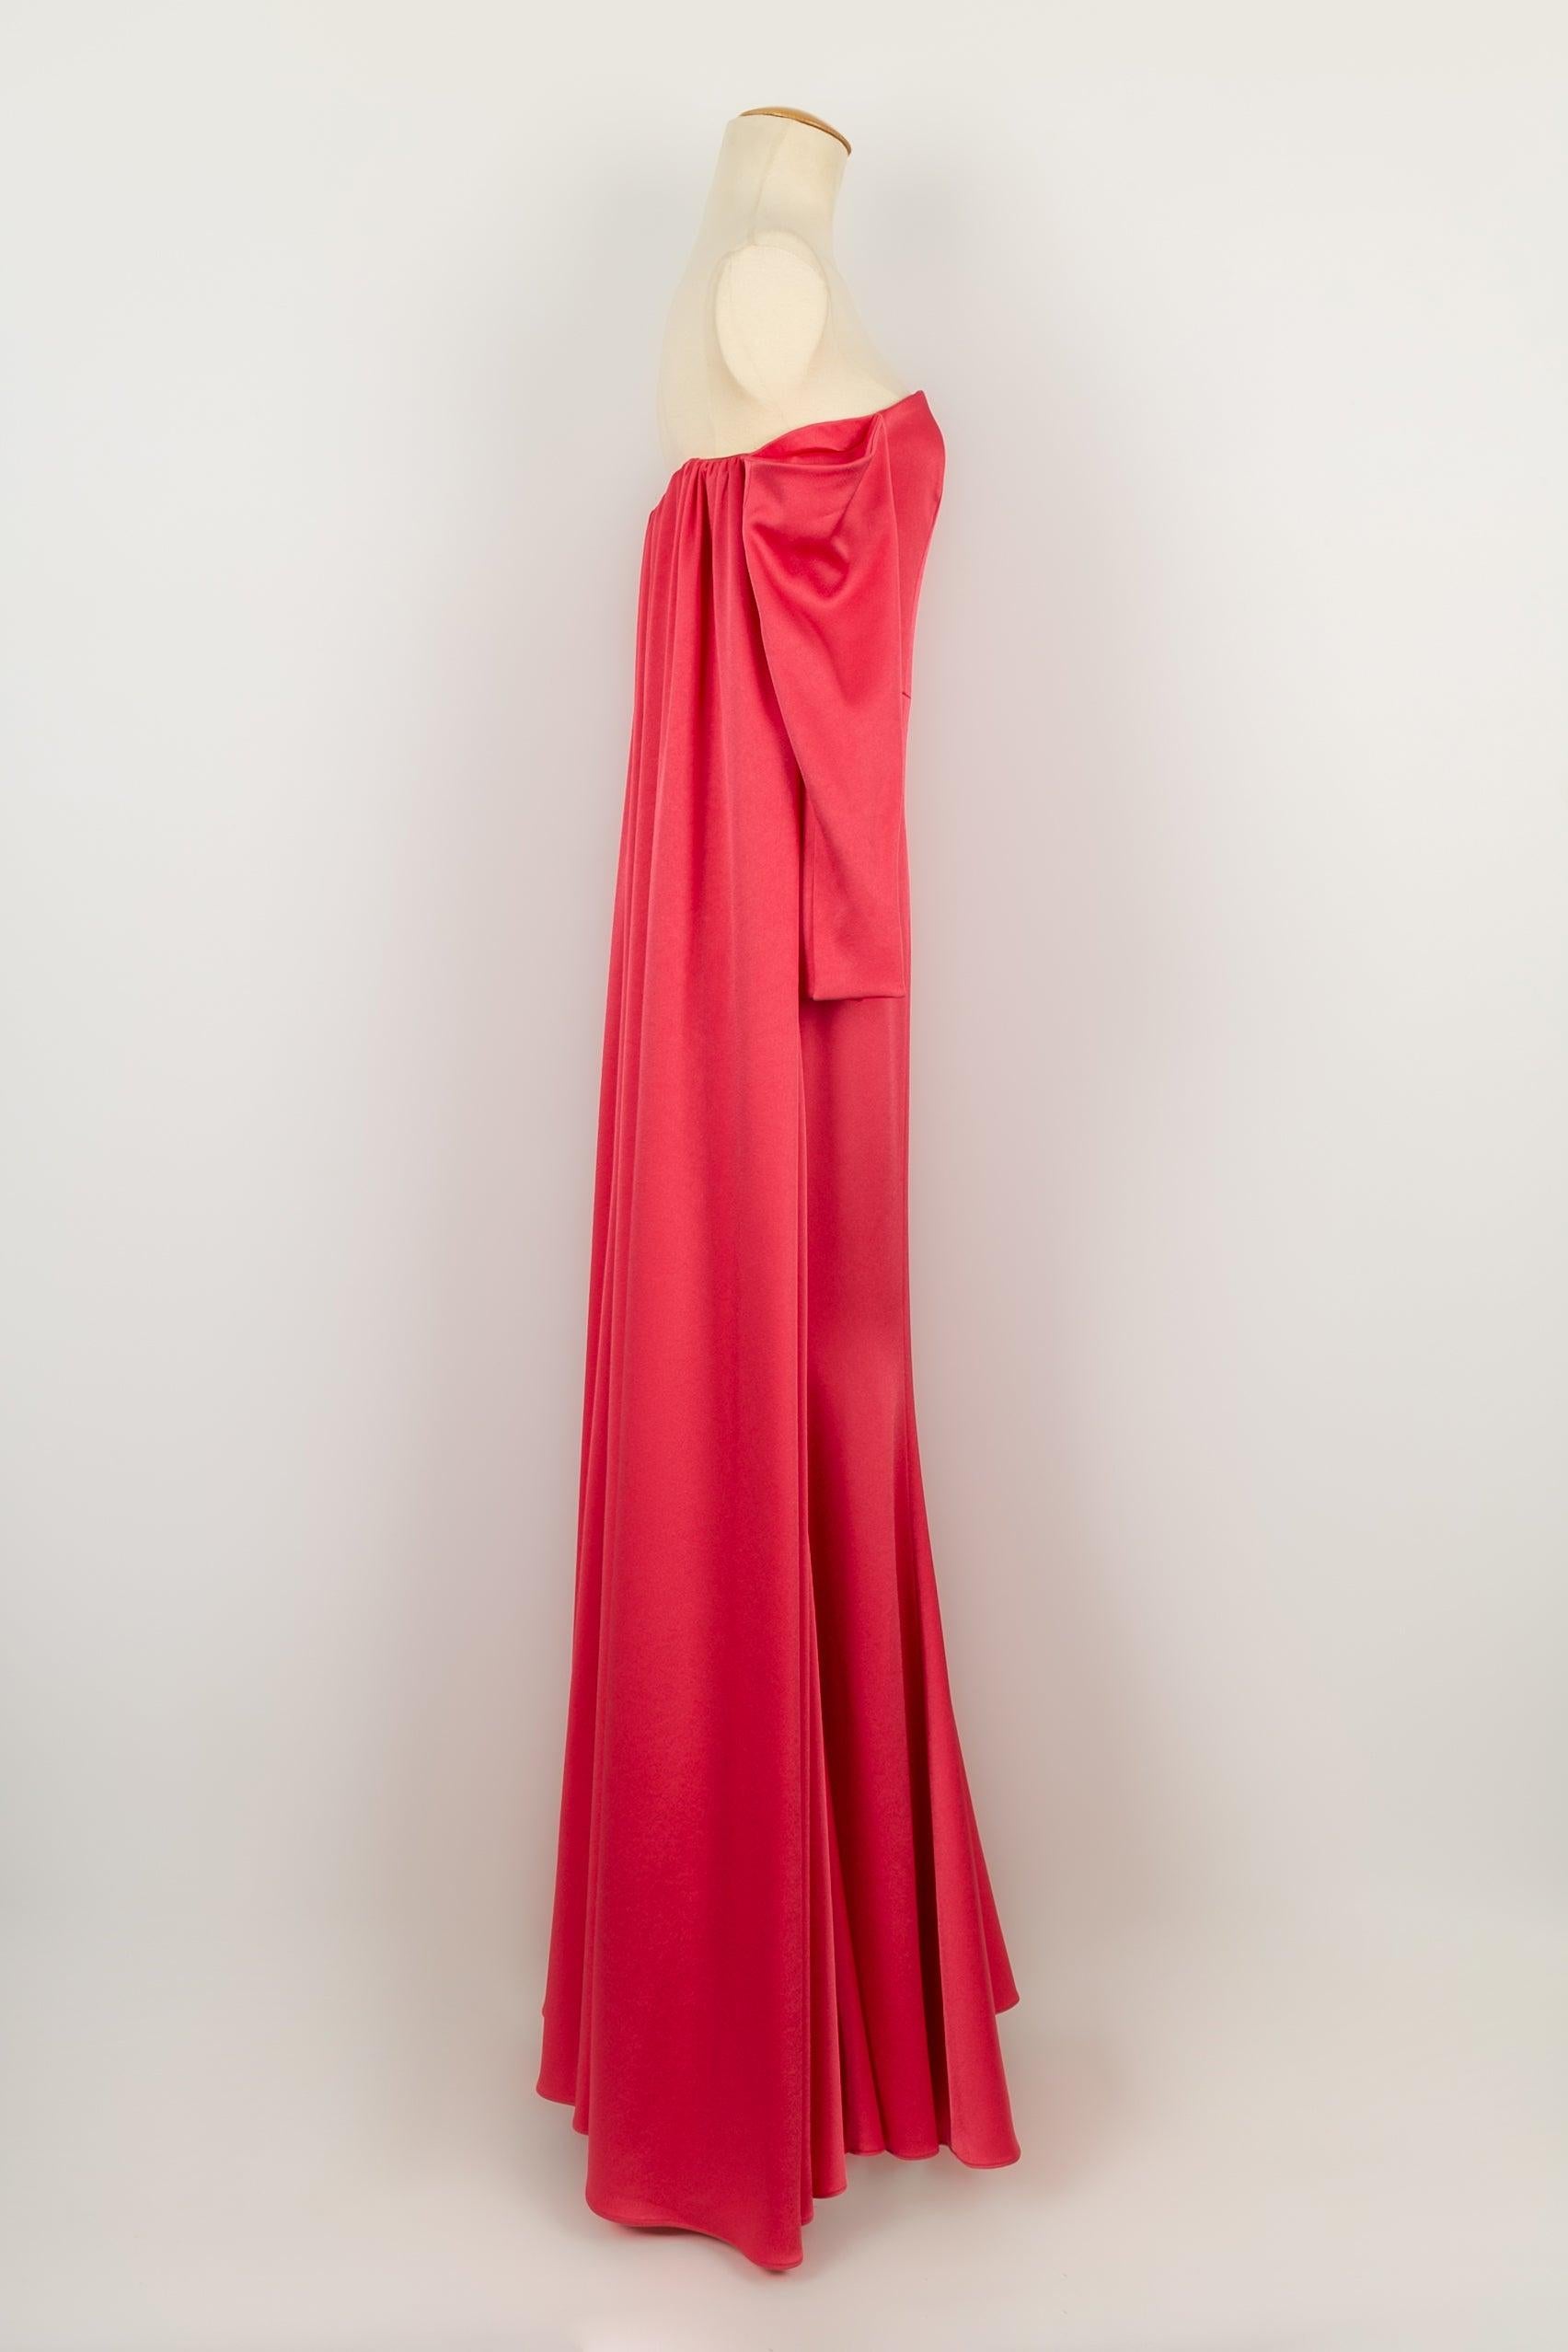 Paule Ka - Maxi long dress in pink duchess satin. Size 36FR. 2022 Collection.

Additional information:
Condition: Very good condition
Dimensions: Length: about 130 cm
Period: 21st Century

Seller Reference: VR137